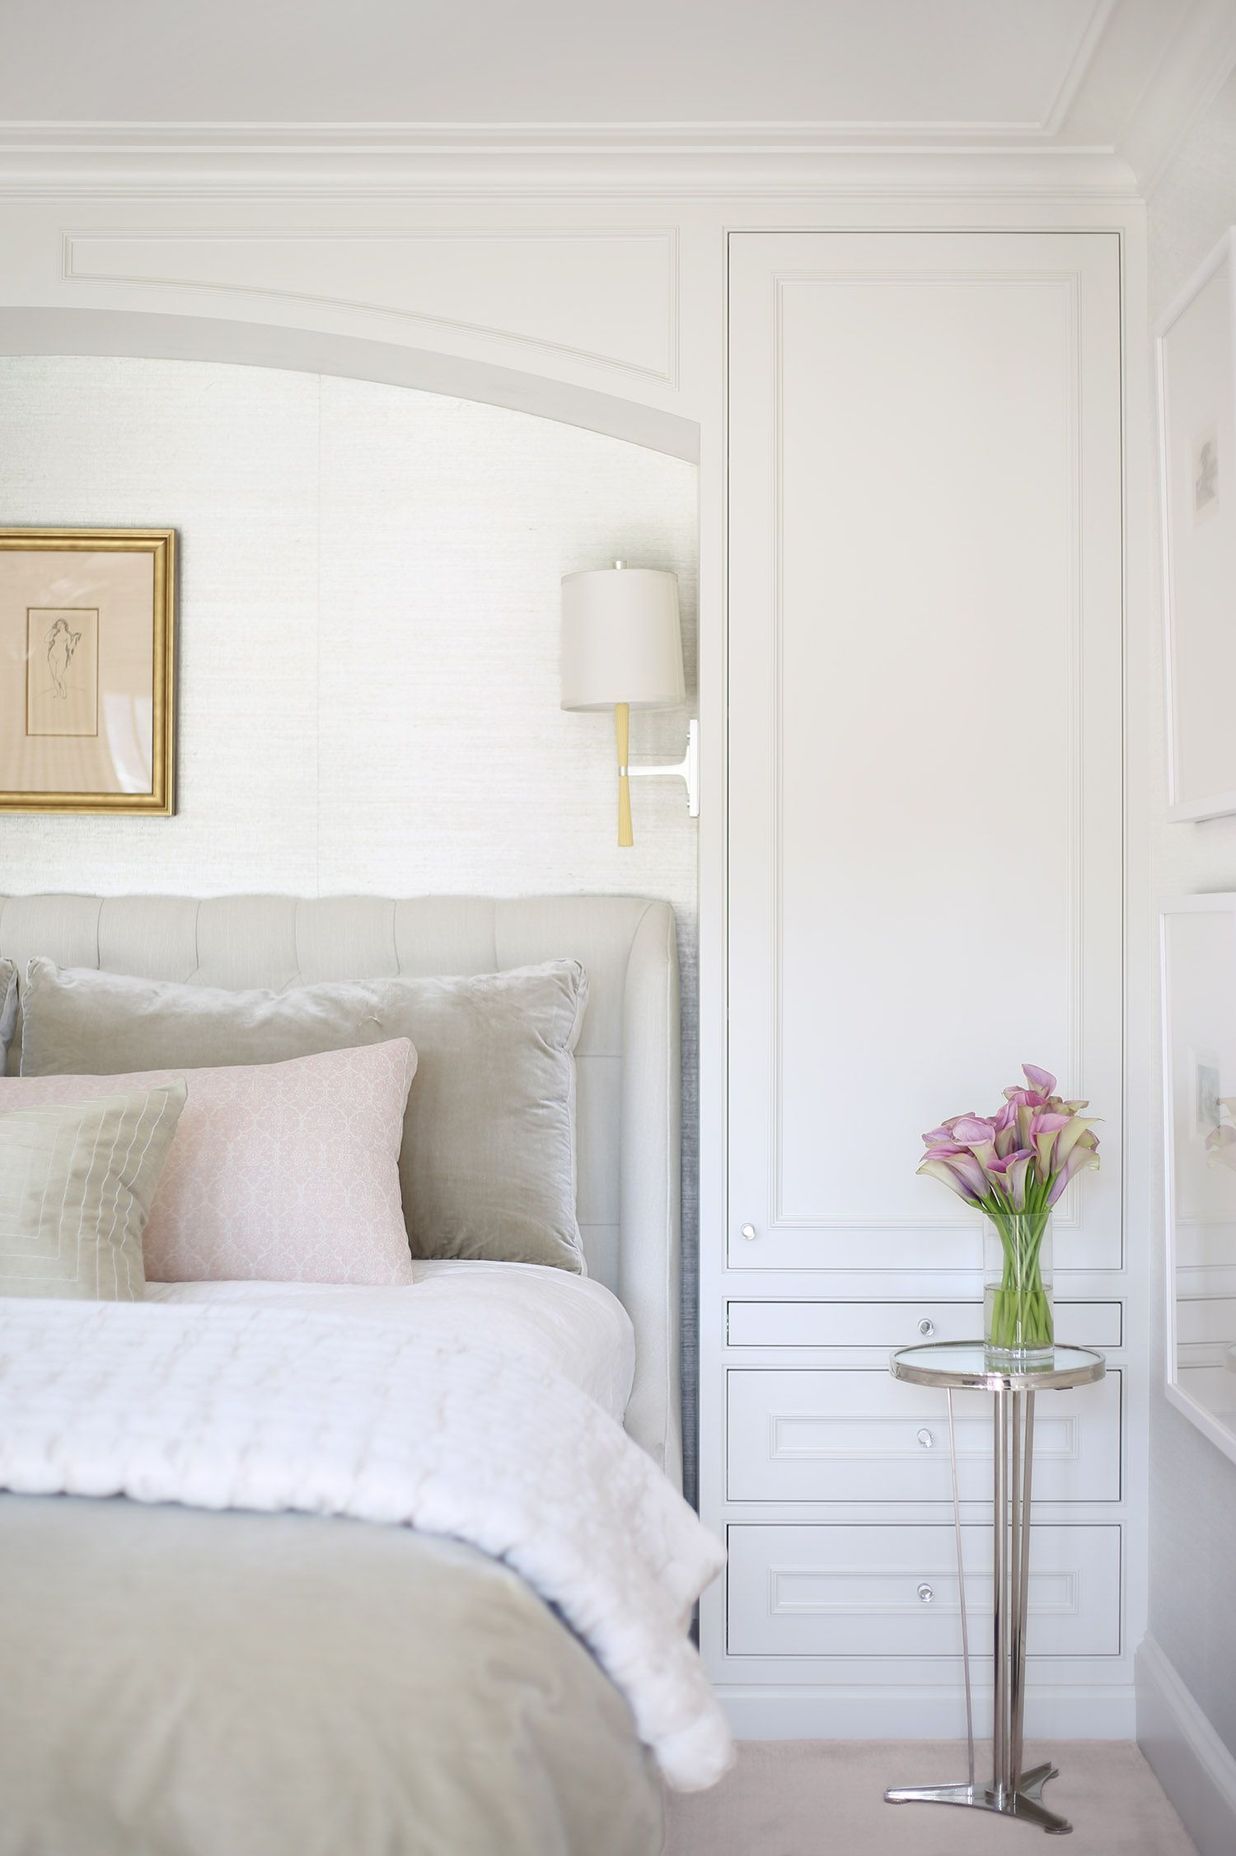 Millwork, molding and bedding.  Interiors by Lisa Tharp.